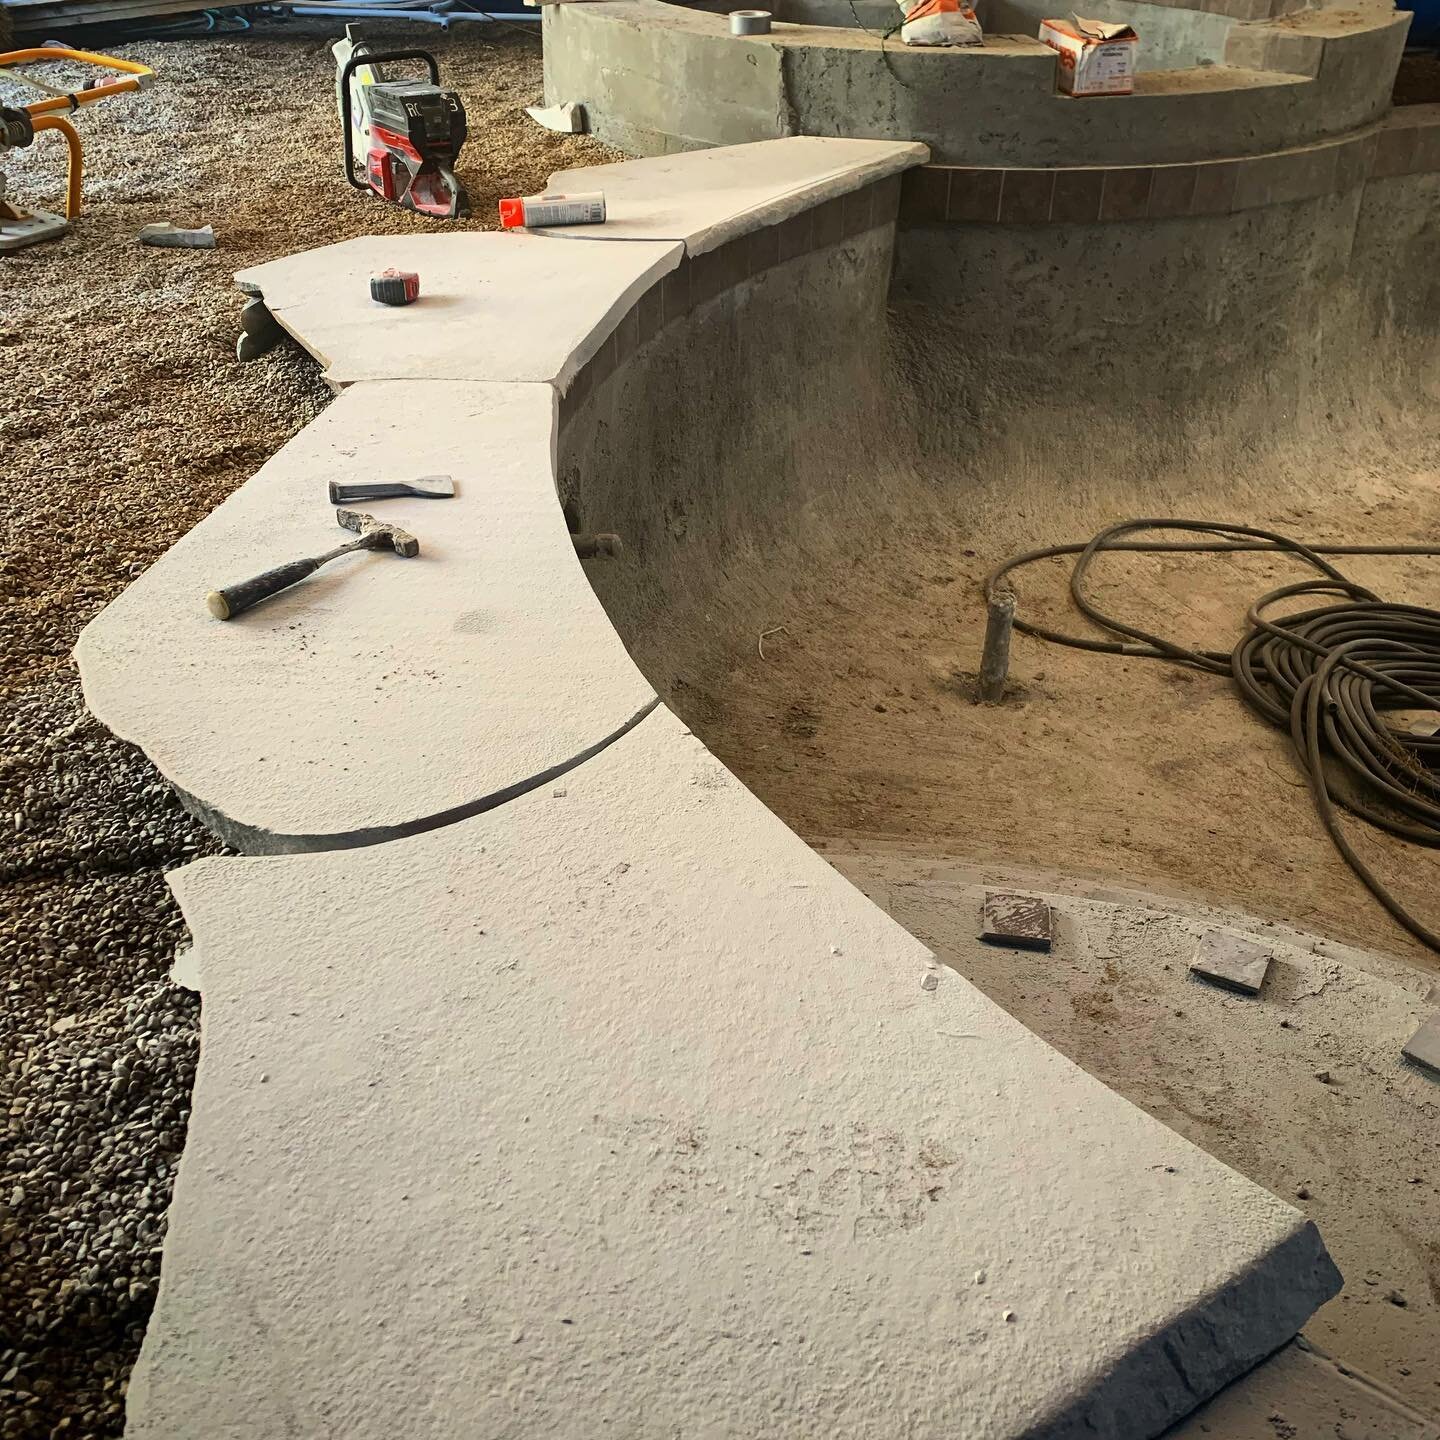 Setting stone coping. Working in a tent that covers the whole pool and spa! #premierpoolandspa #sitevisit #heritagelandscape #landscapearchitecture #hardscape #stones